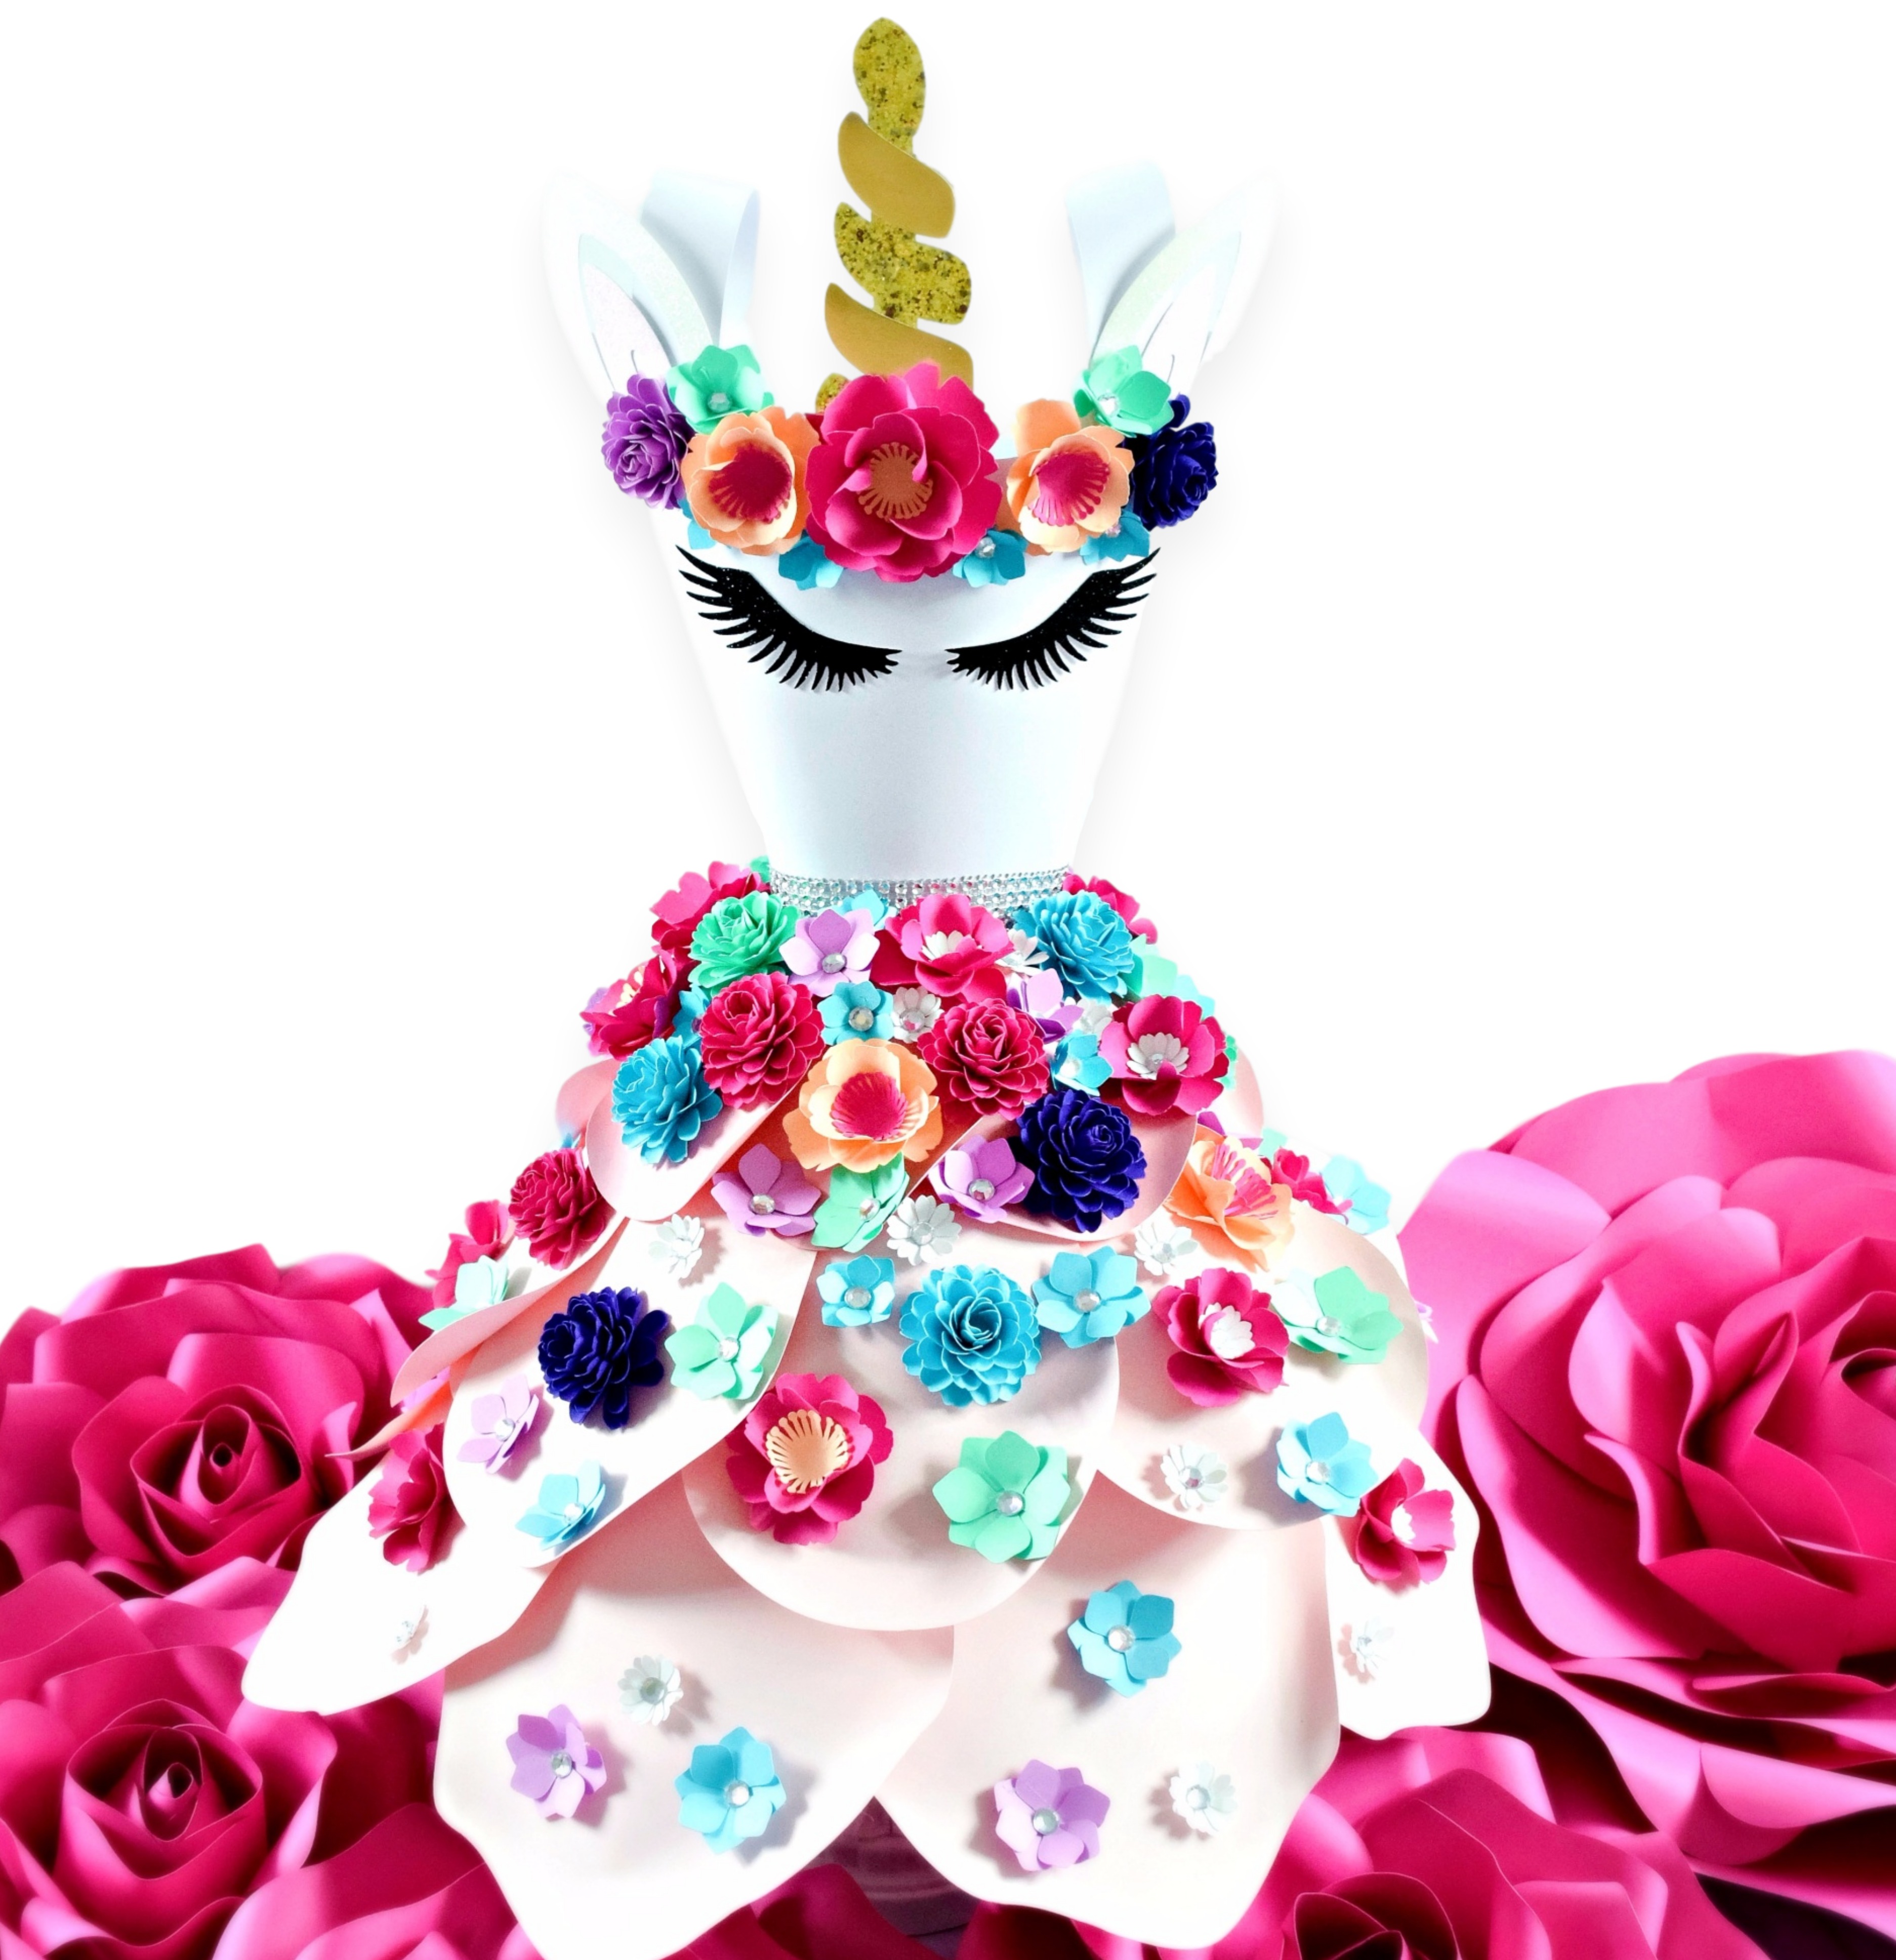 A paper dress decorated to look like a unicorn, with many colorful flowers flowing down the paper skirt, and a unicorn face on the bodice of the paper dress.